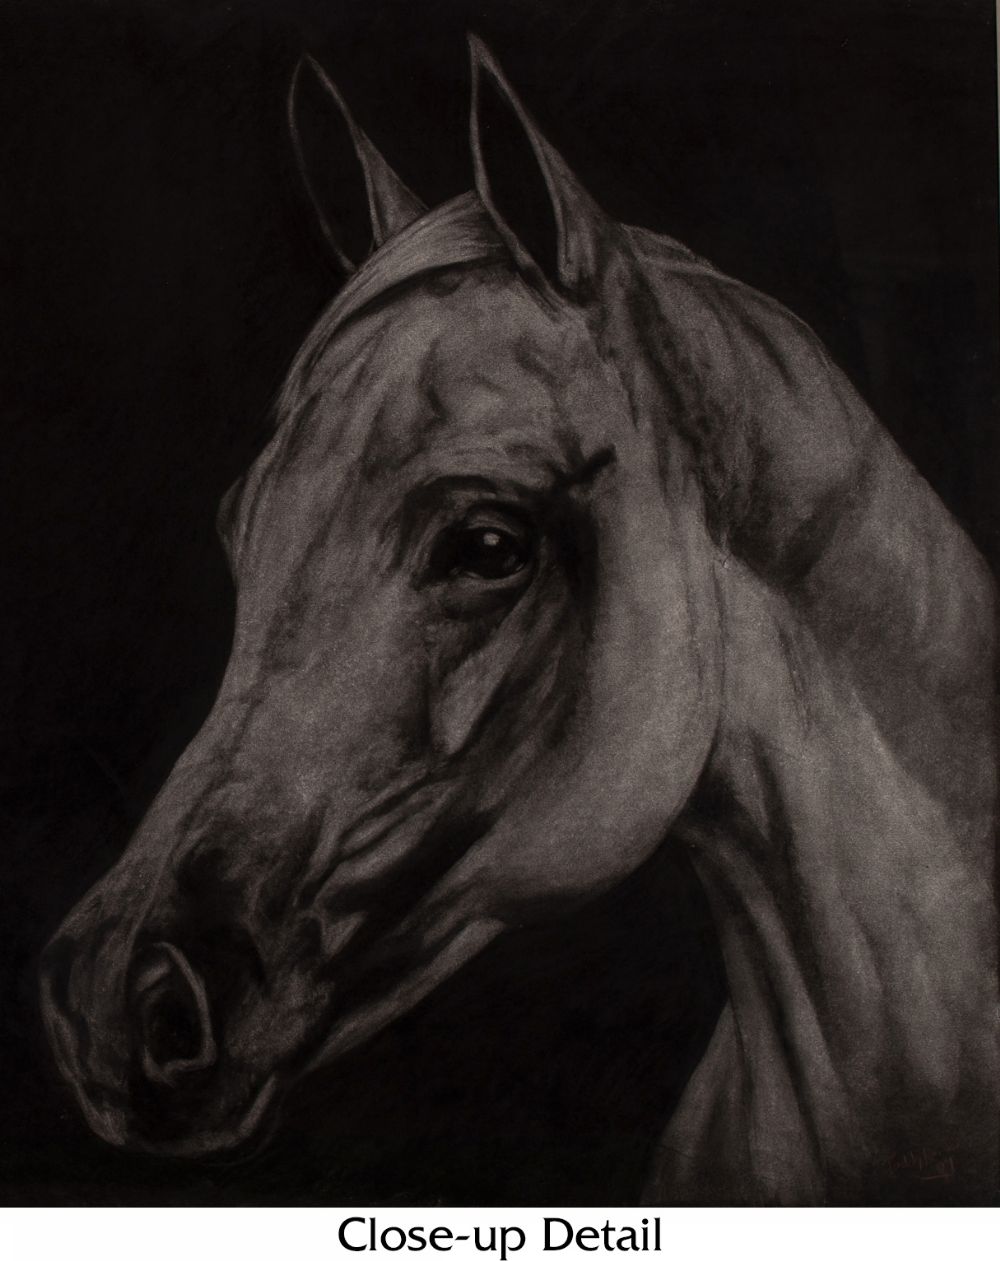 STUDY OF A HORSE by Paddy Lennon  at Dolan's Art Auction House